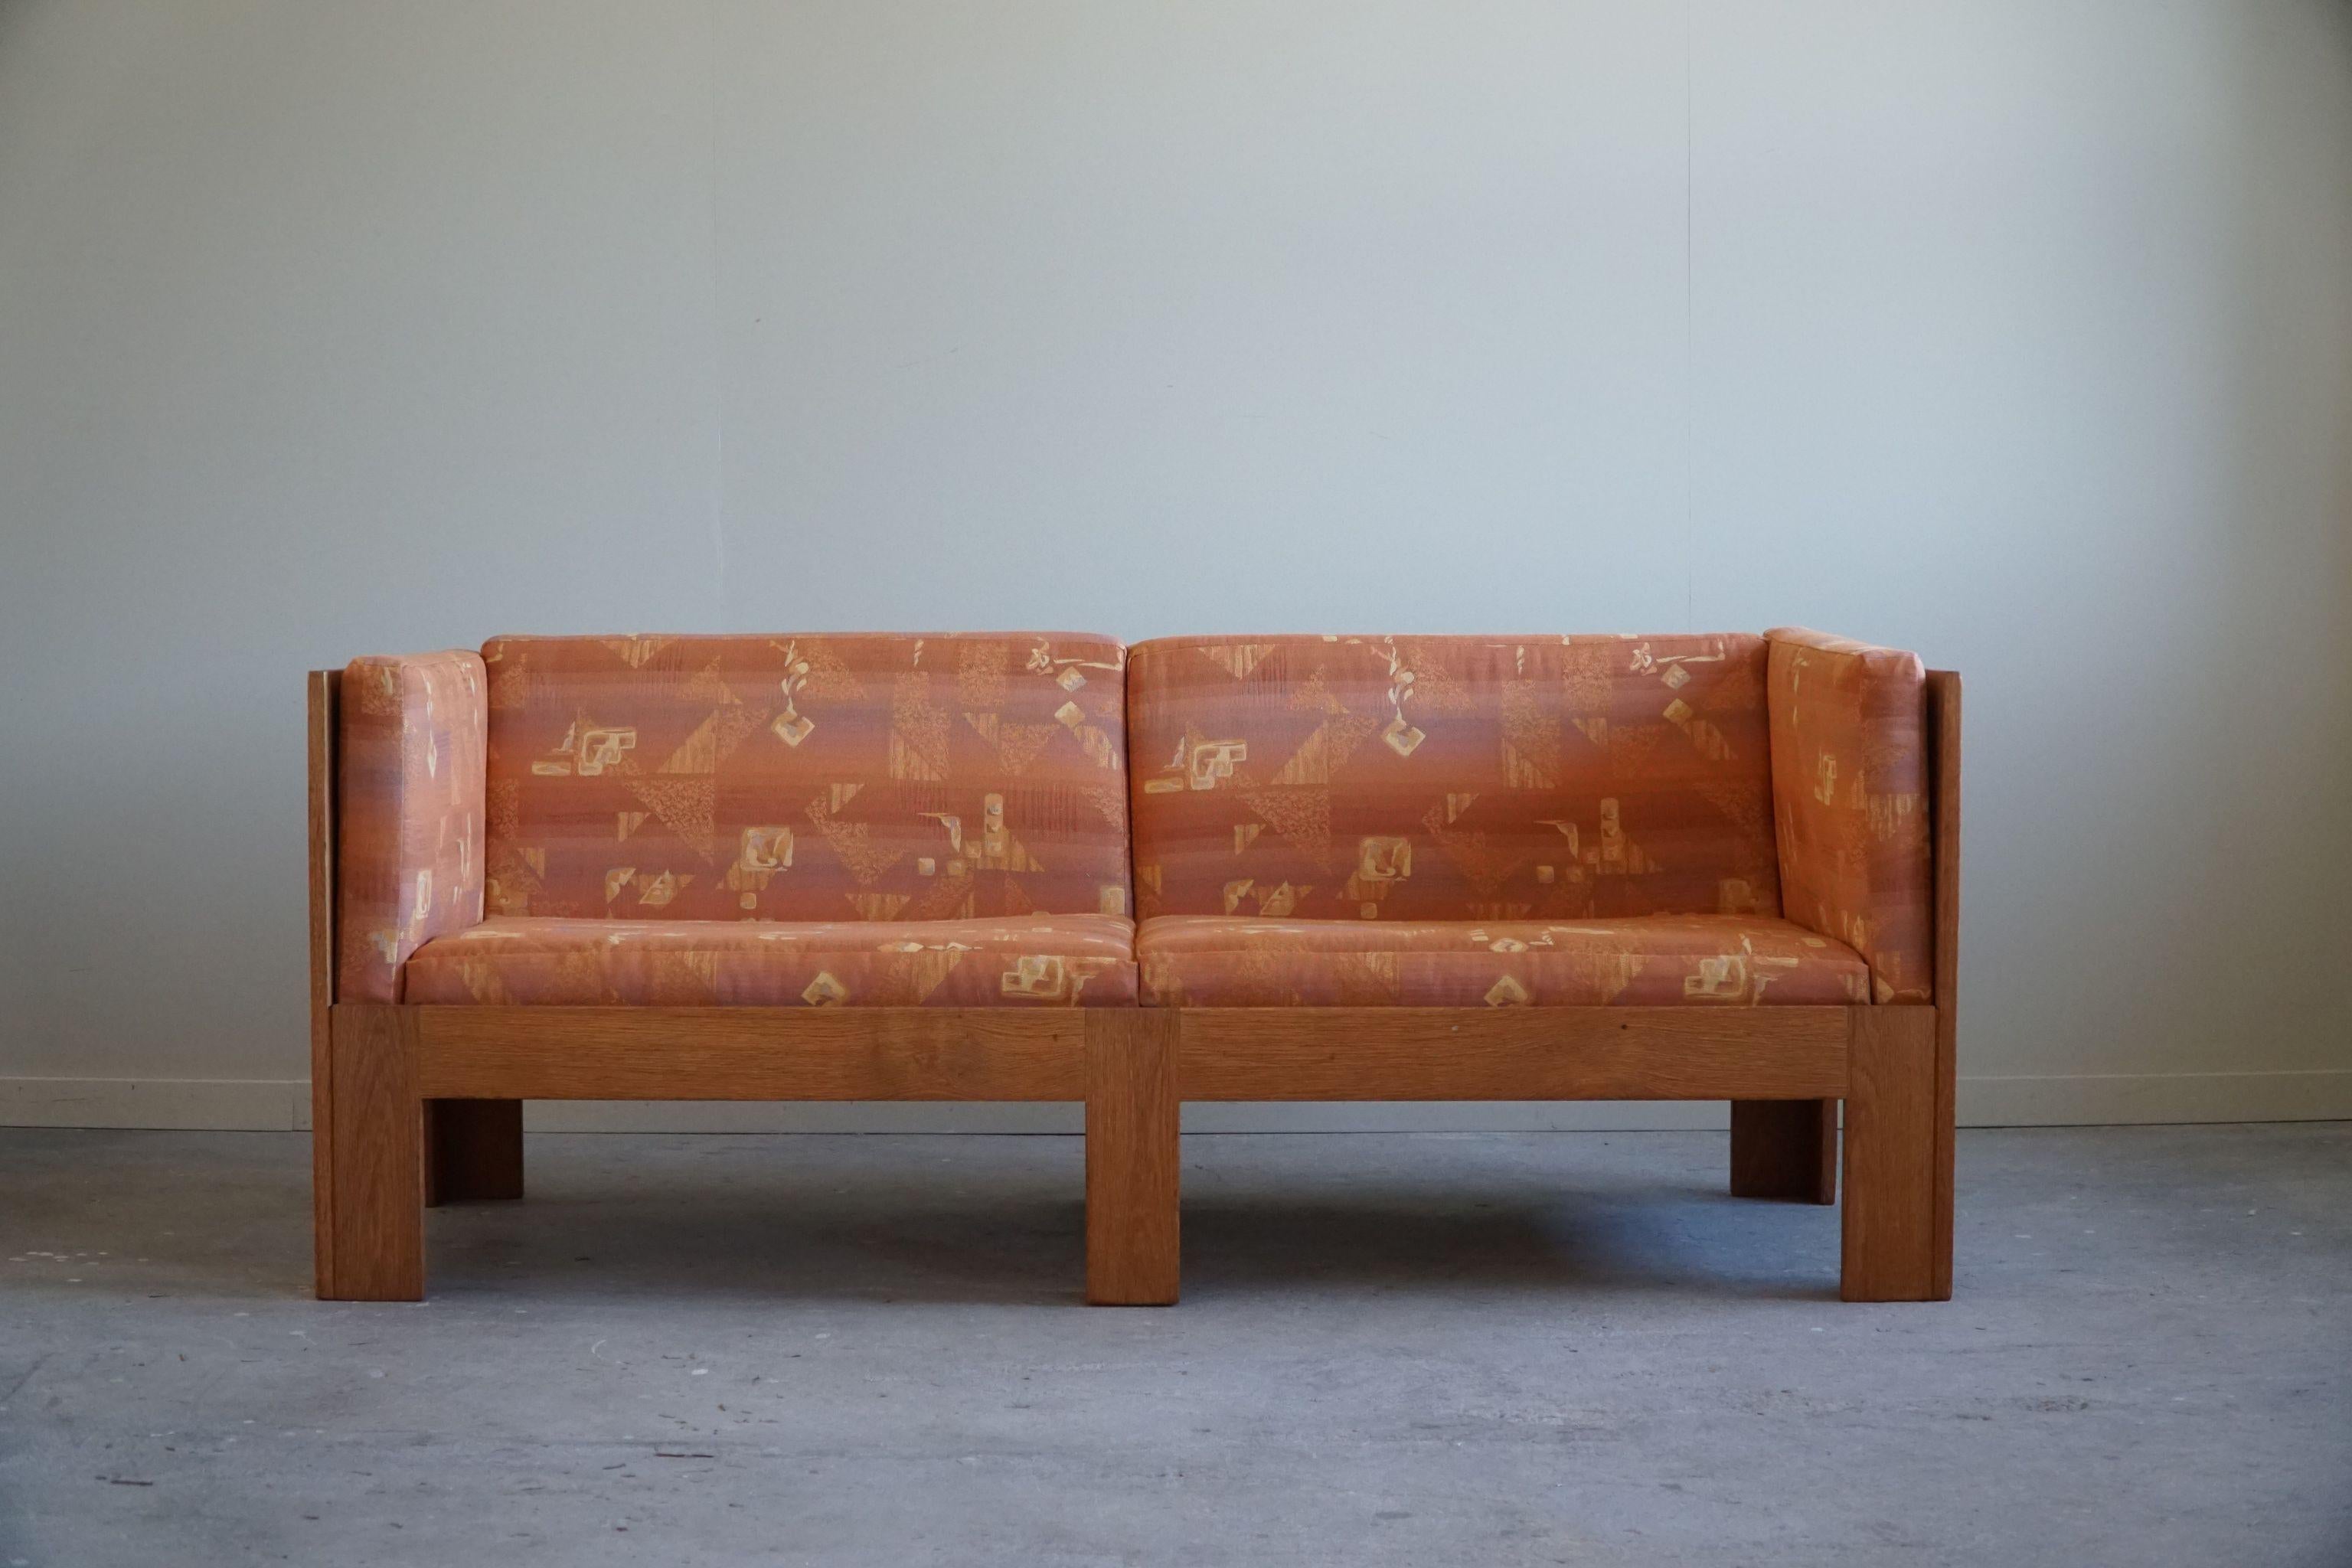 Mid-Century Modern Danish Mid Century Two Seater Sofa in Oak, Reupholstered, by Tage Poulsen, 1960s For Sale